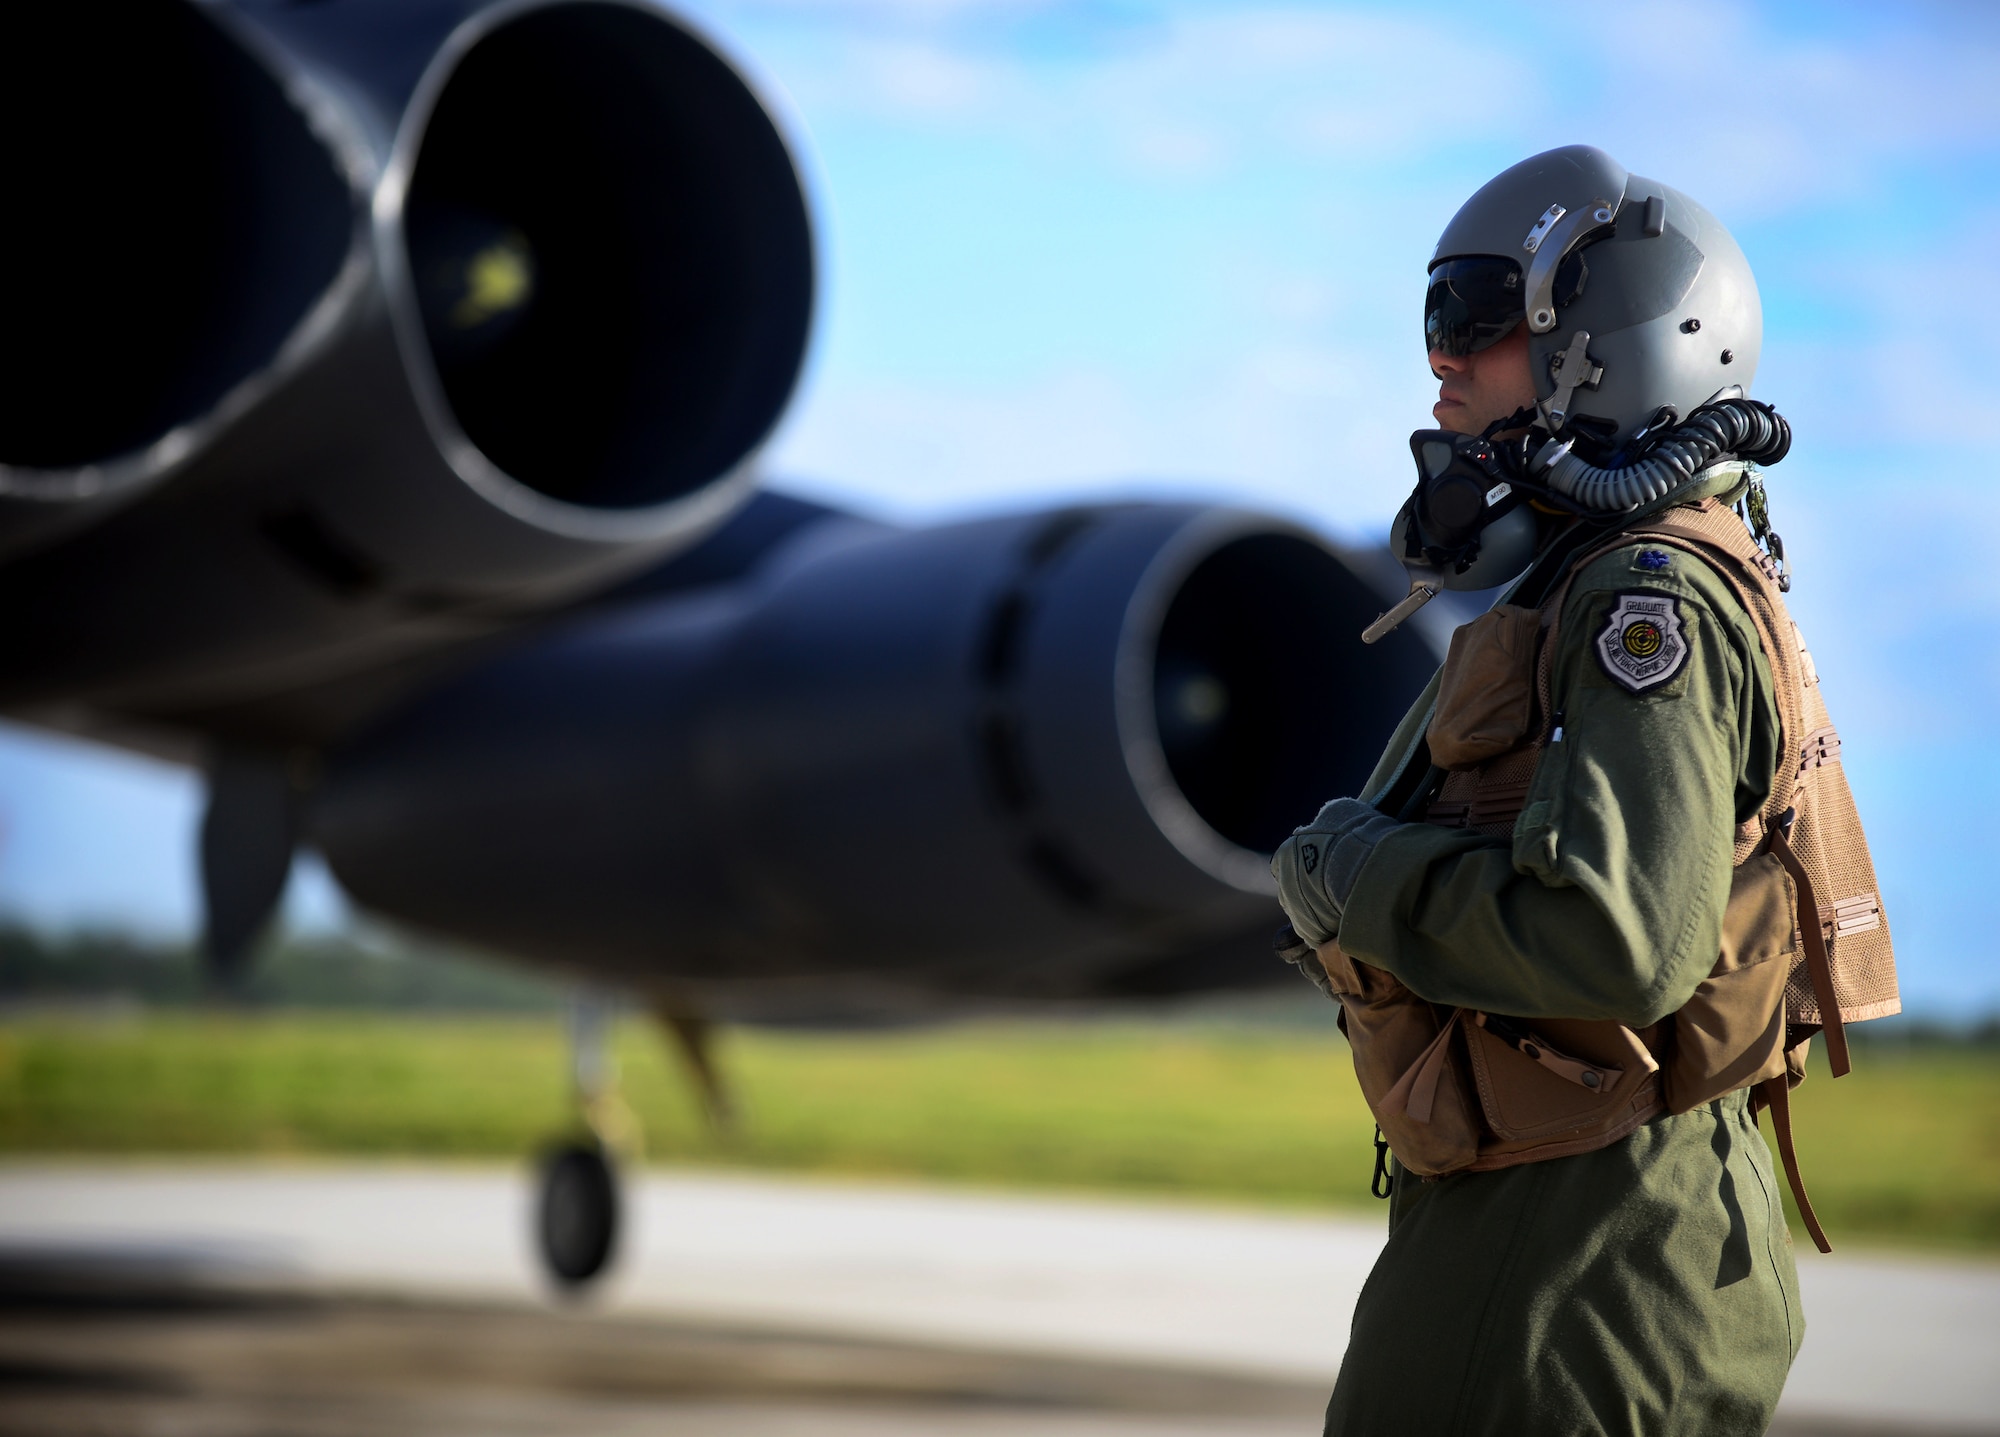 Lt. Col. Michael Maginness, 69th Expeditionary Bomb Squadron director of operations, prepares to board a B-52 Stratofortress March 21, 2016, at Andersen Air Force Base, Guam. The strategic global strike capability of B-52’s deters potential adversaries and provides reassurance to allies and partners that the U.S. is capable to defend its national security interests in the Indo-Asia-Pacific region. (U.S. Air Force photo by Senior Airman Joshua Smoot/Released)